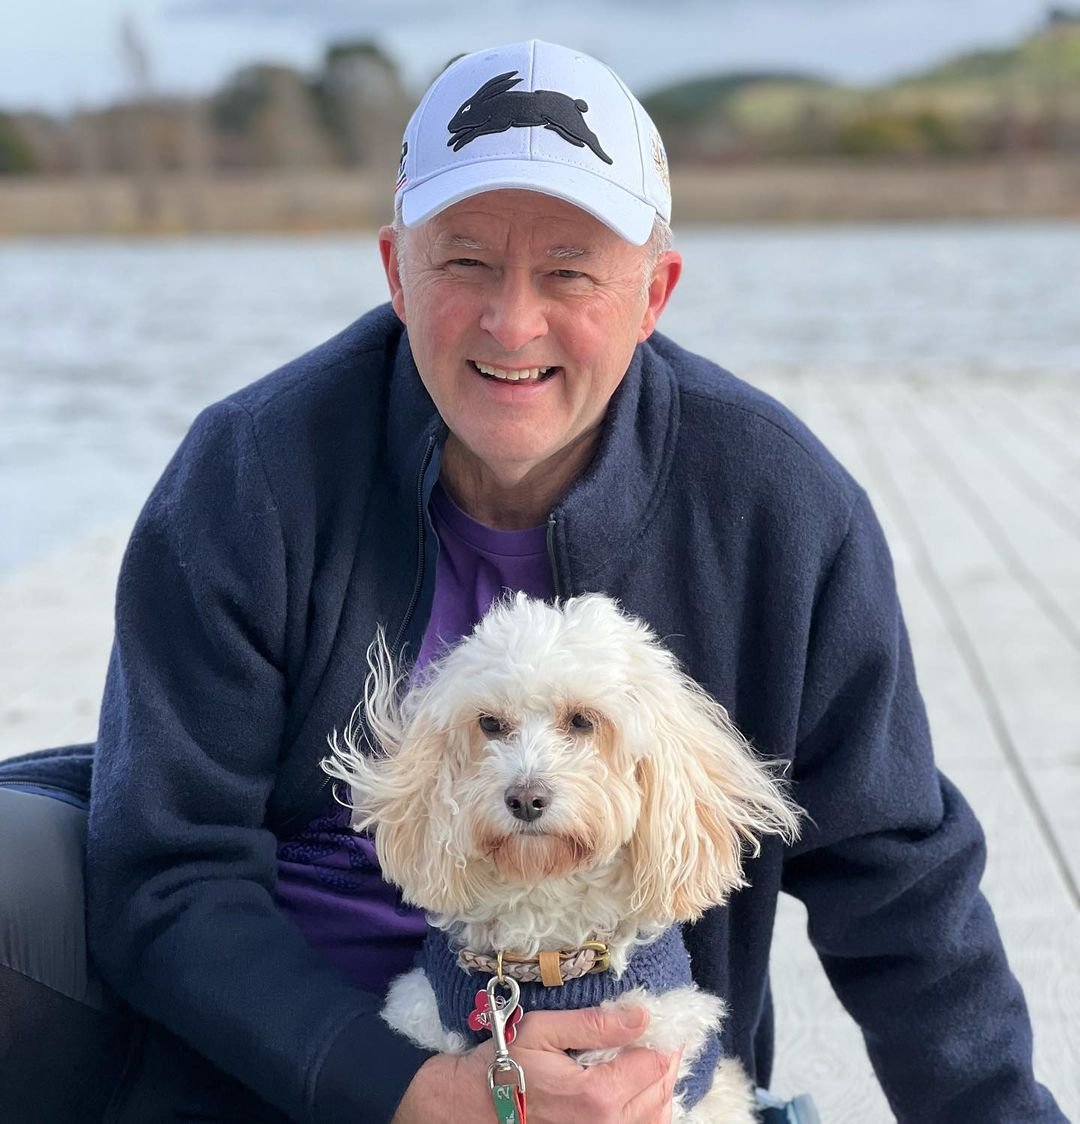 'A very chilly Sunday morning walk around the lake in Canberra 🐶🥶'